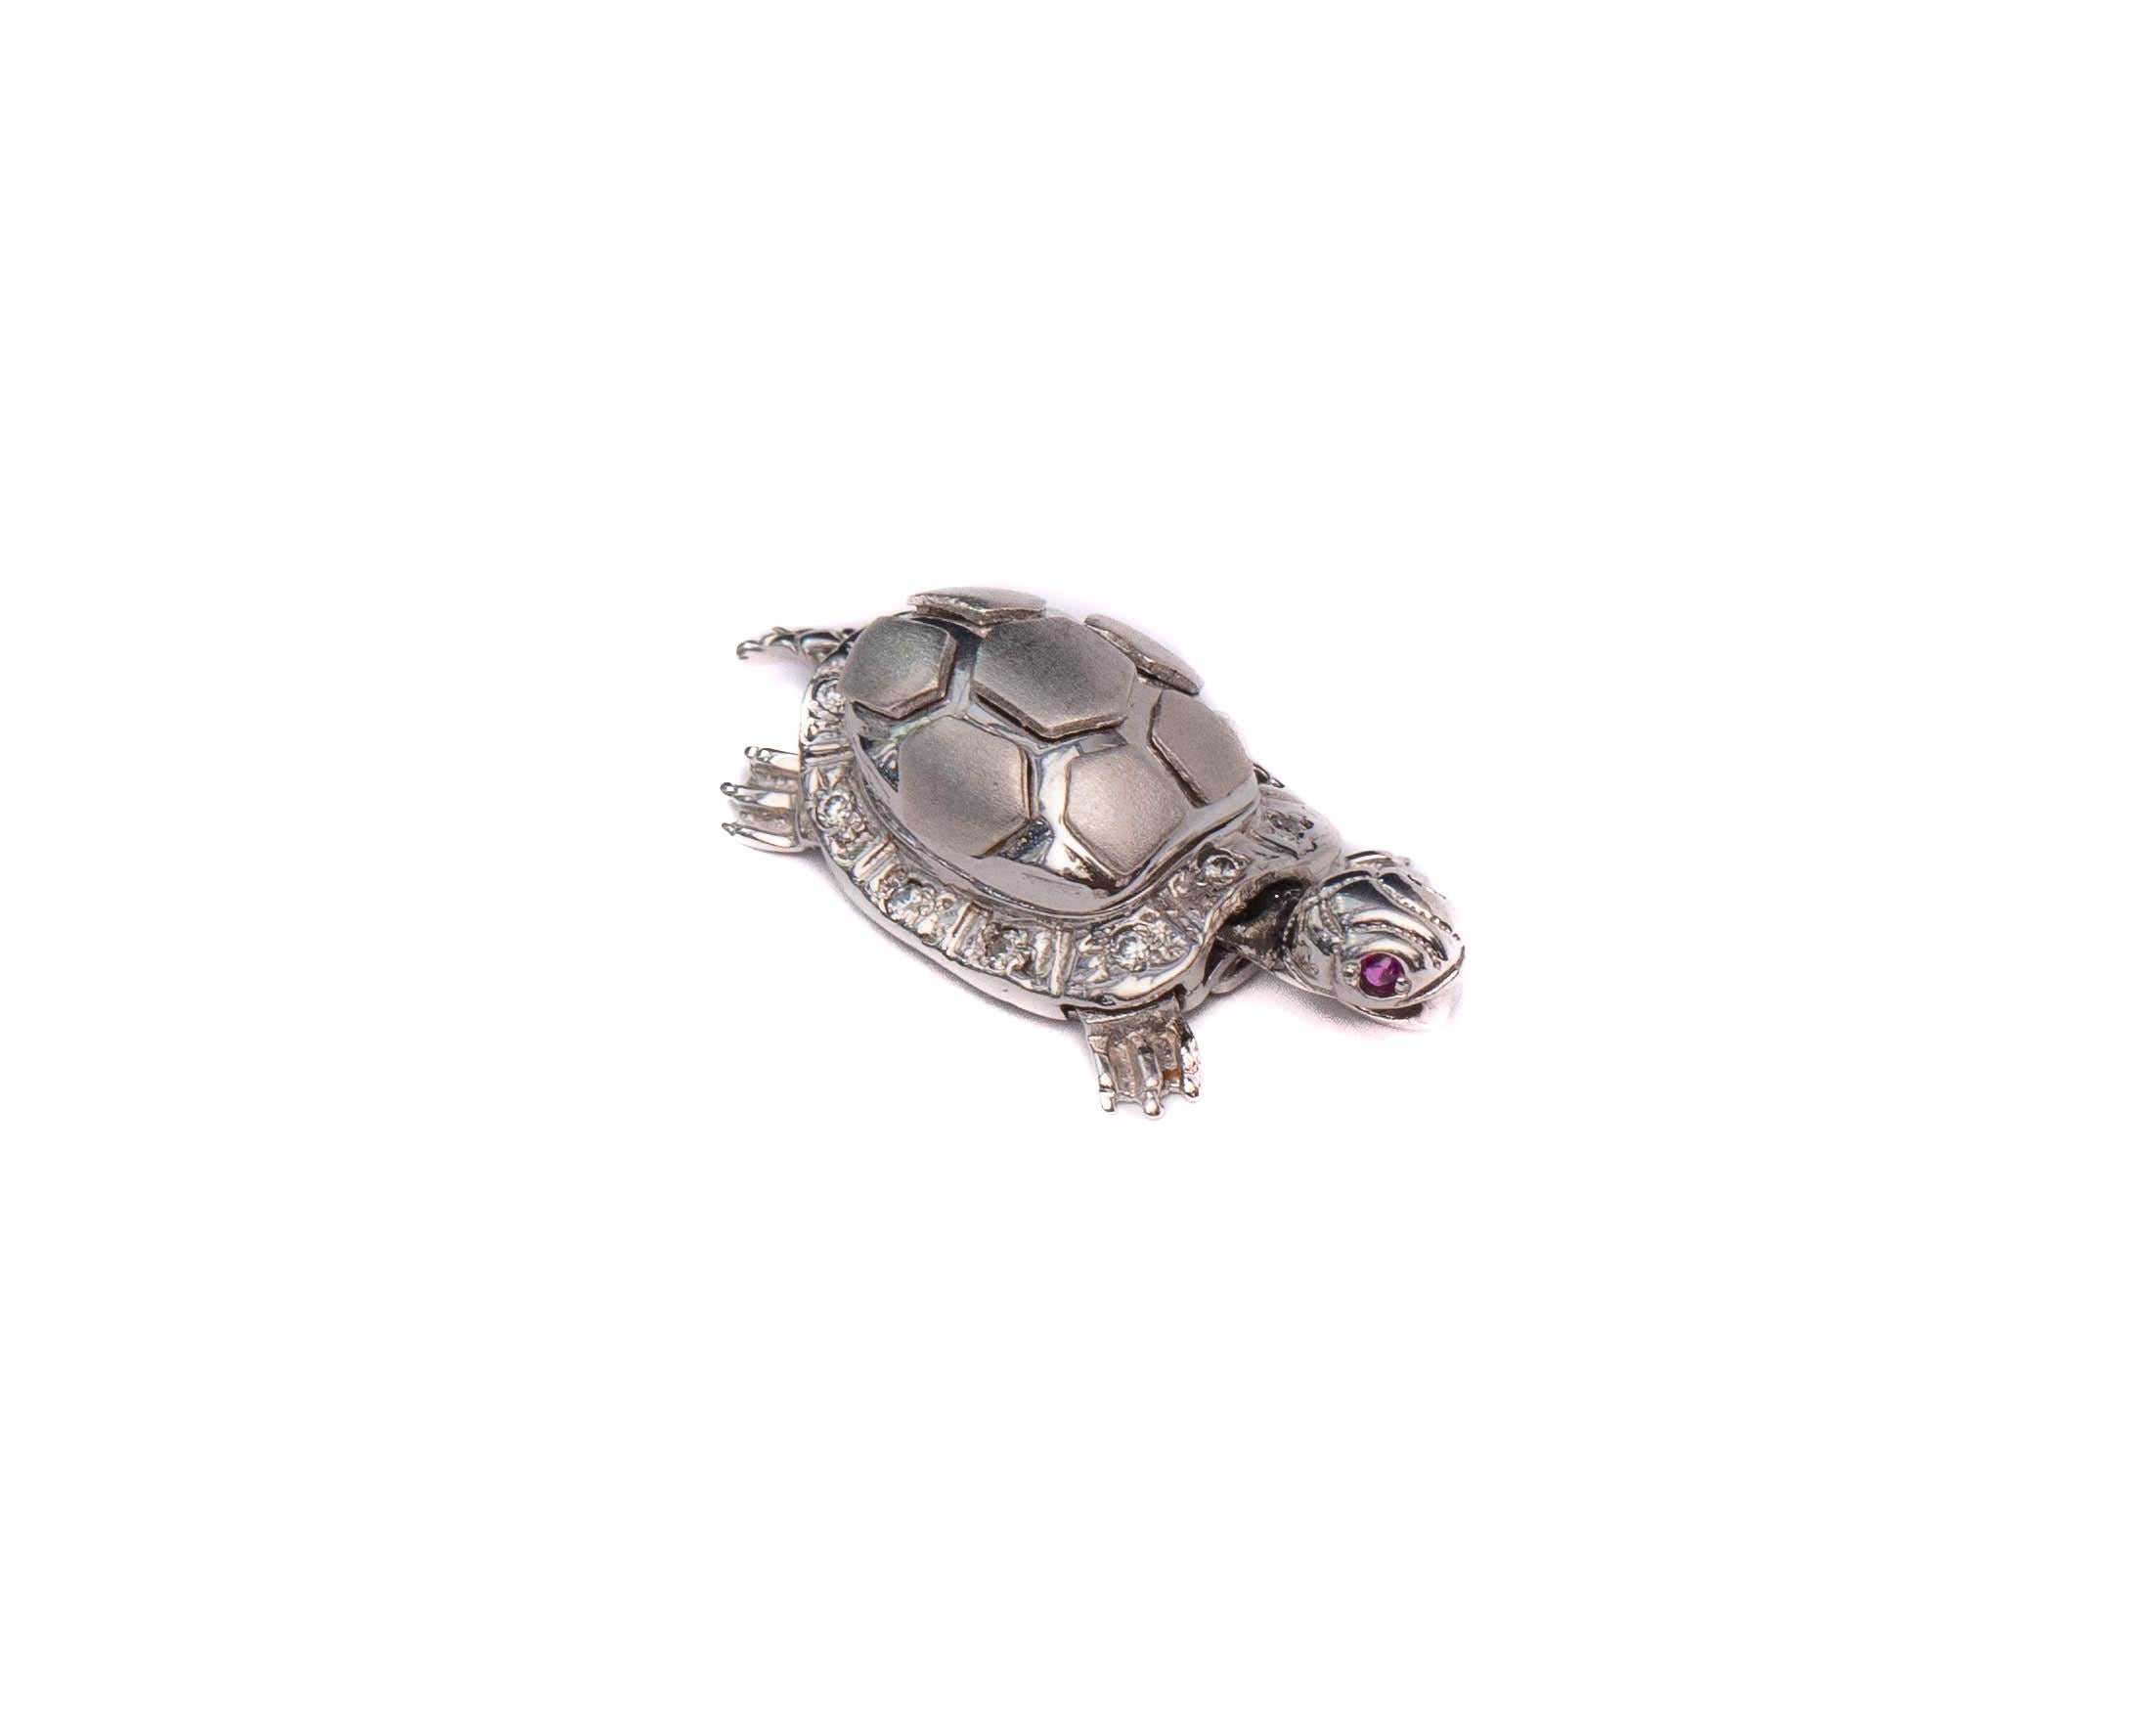 Pendant Details:
Metal type: 18 Karat White Gold
Weight: 6.06 grams
Measures: 1 inch length 

Features small diamond accents outlining the turtle shell
Features ruby accents on the eyes
Head and tail of the turtle articulate nicely 
The pendant is